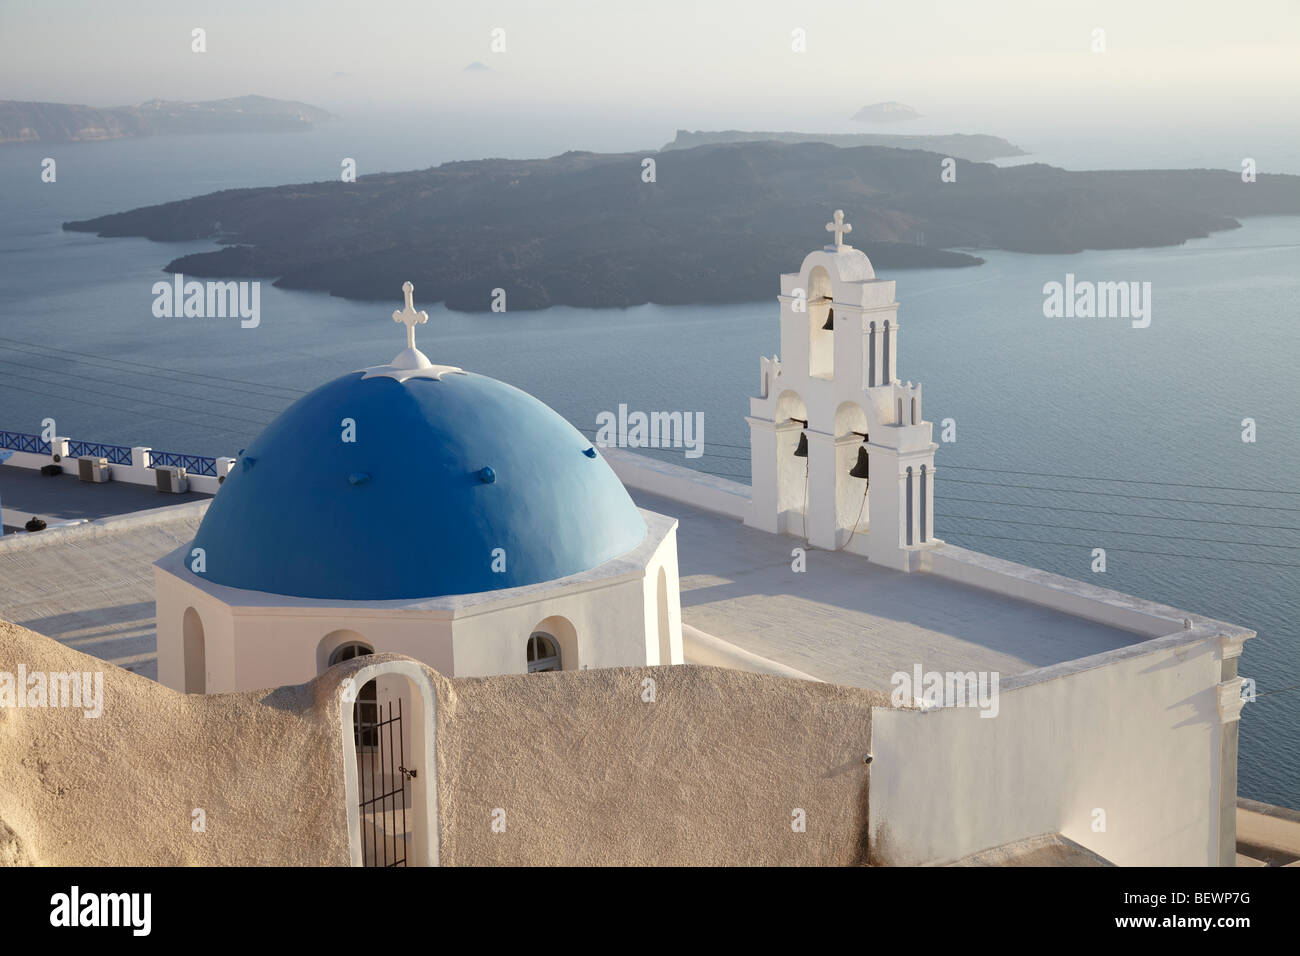 Greek white church with bell tower and blue dome, overlooking the sea, Santorini, Cyclades Islands, Greece. Stock Photo